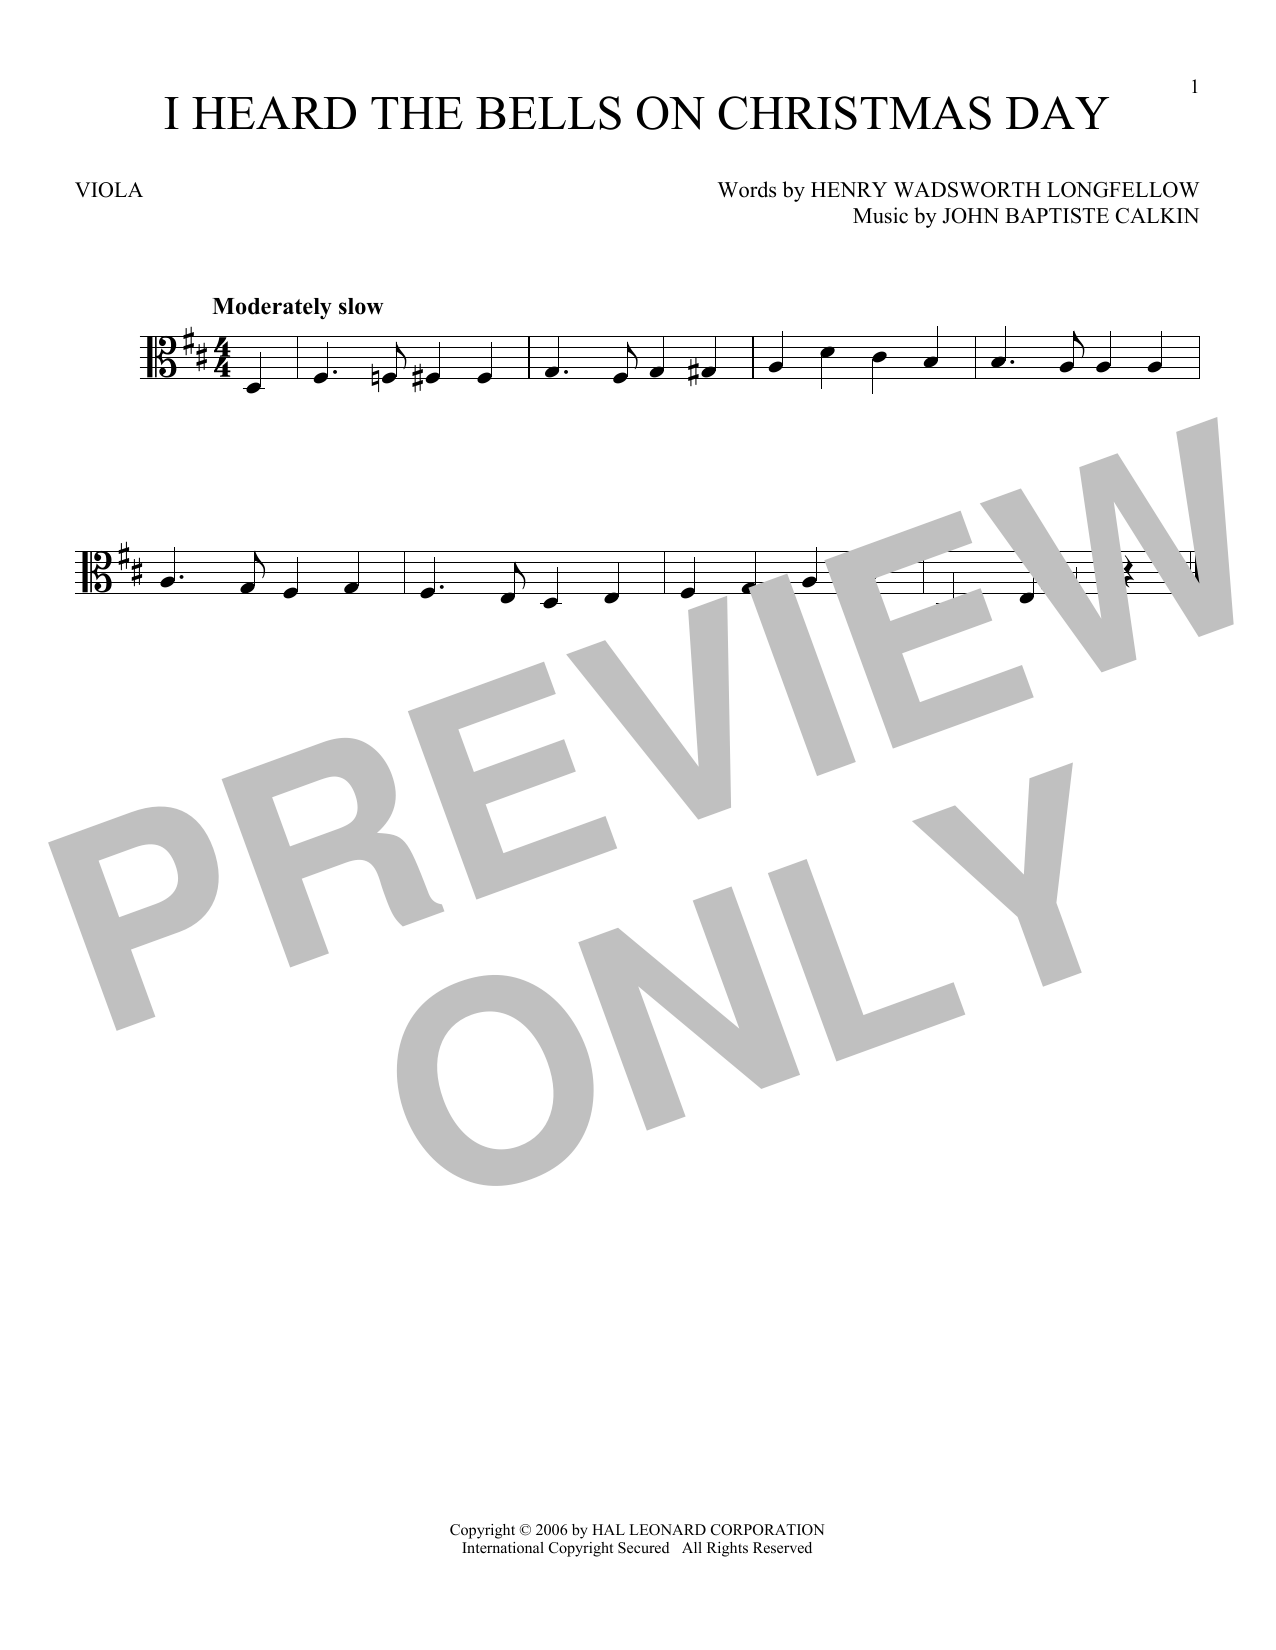 Download Henry Wadsworth Longfellow I Heard The Bells On Christmas Day Sheet Music